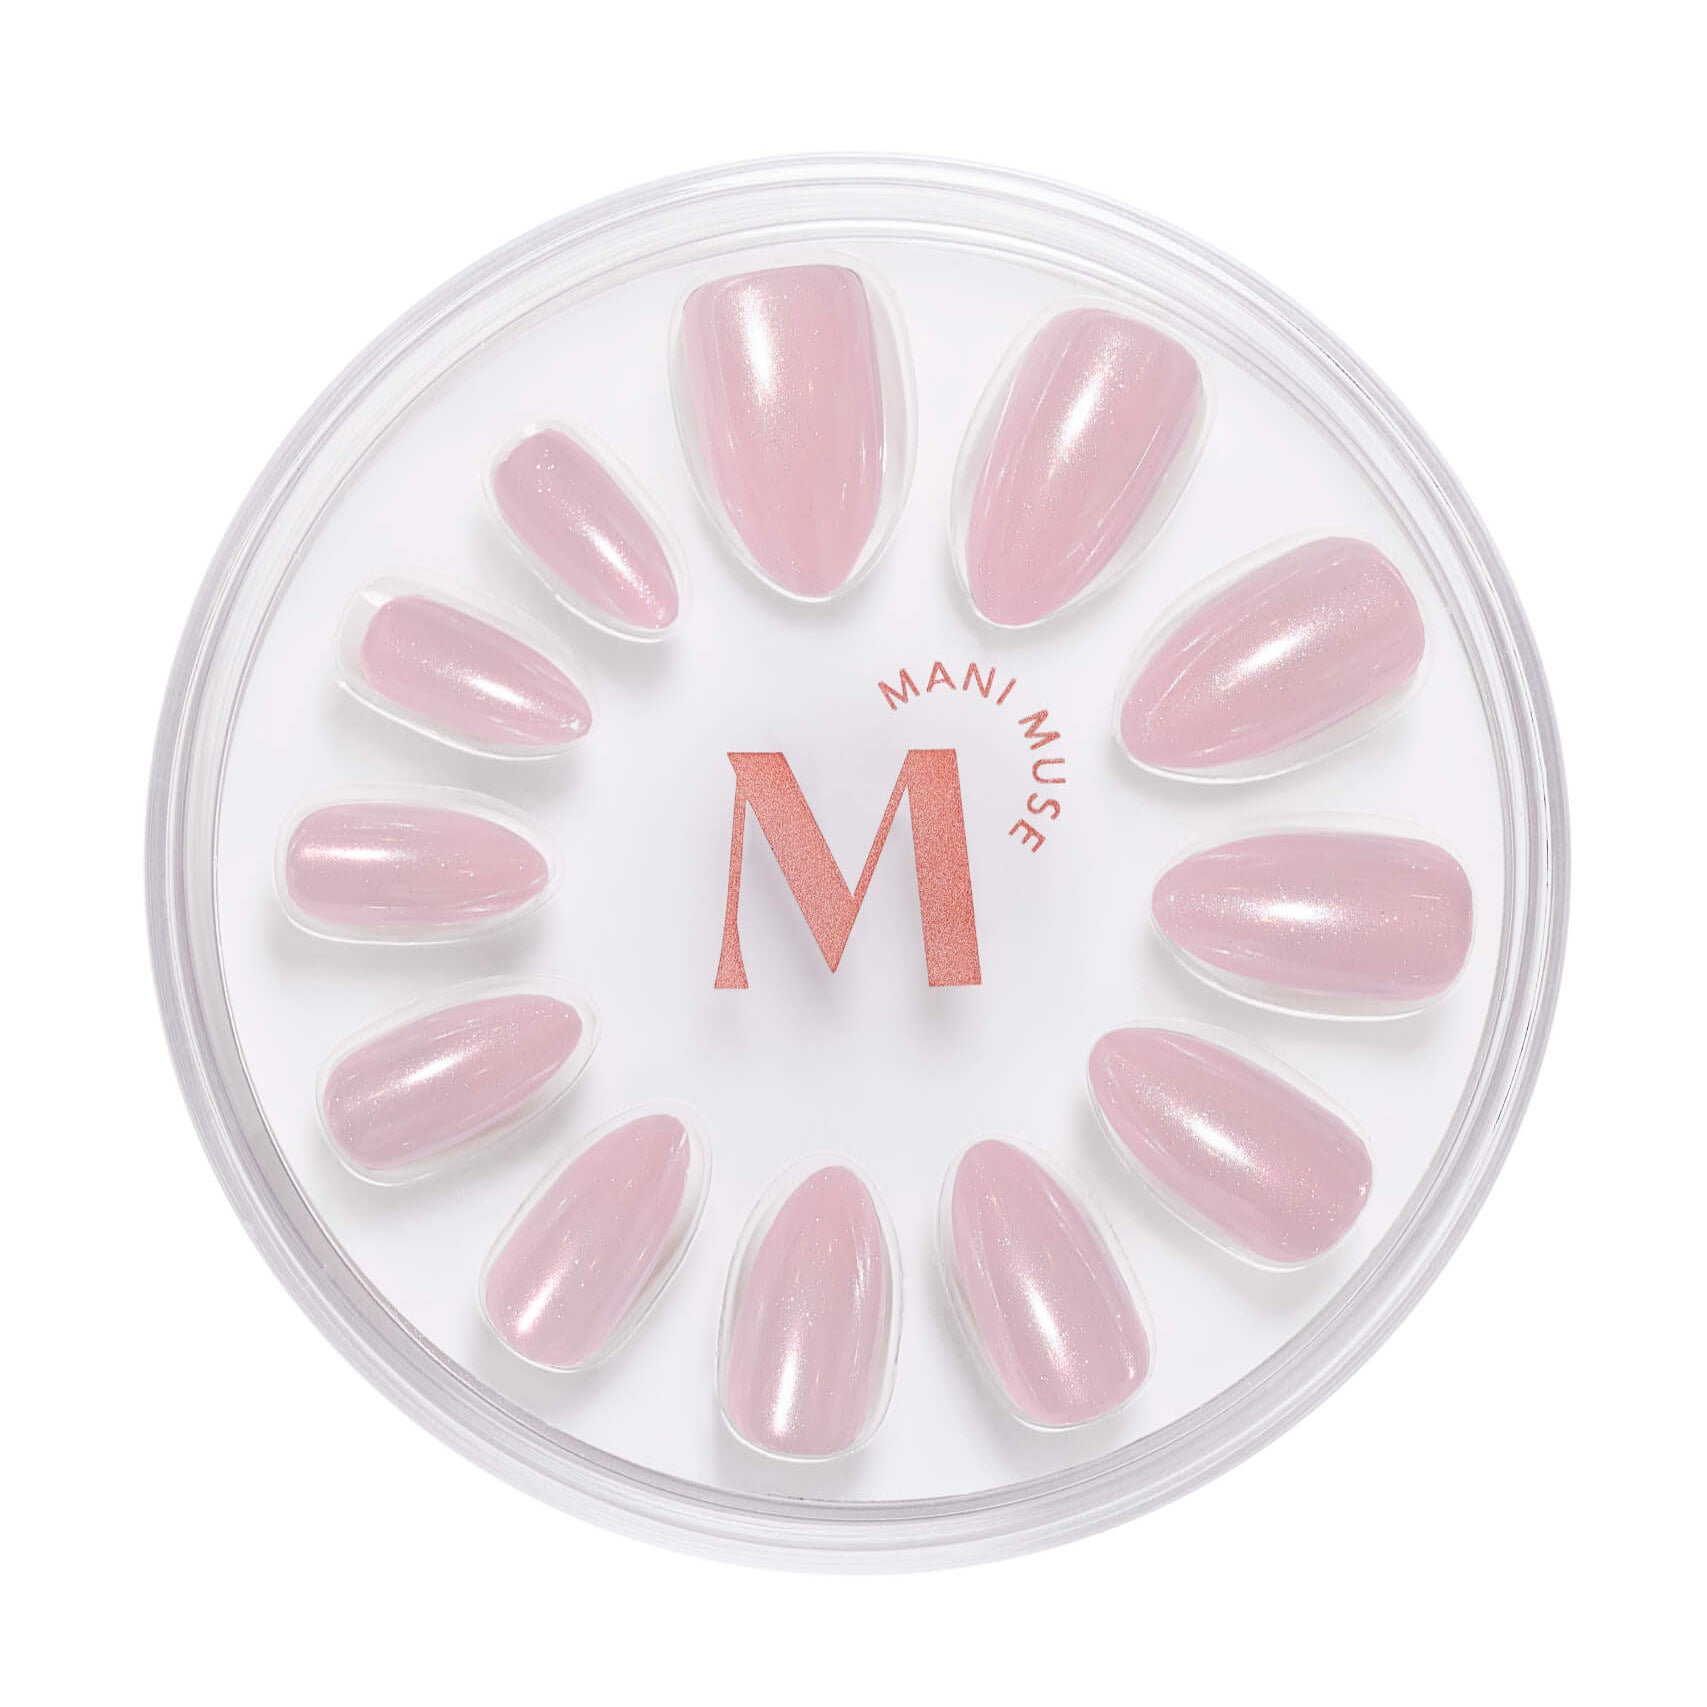 Mani Muse Strawberry Glazed, Ain't Phased Press-on Nails - Almond